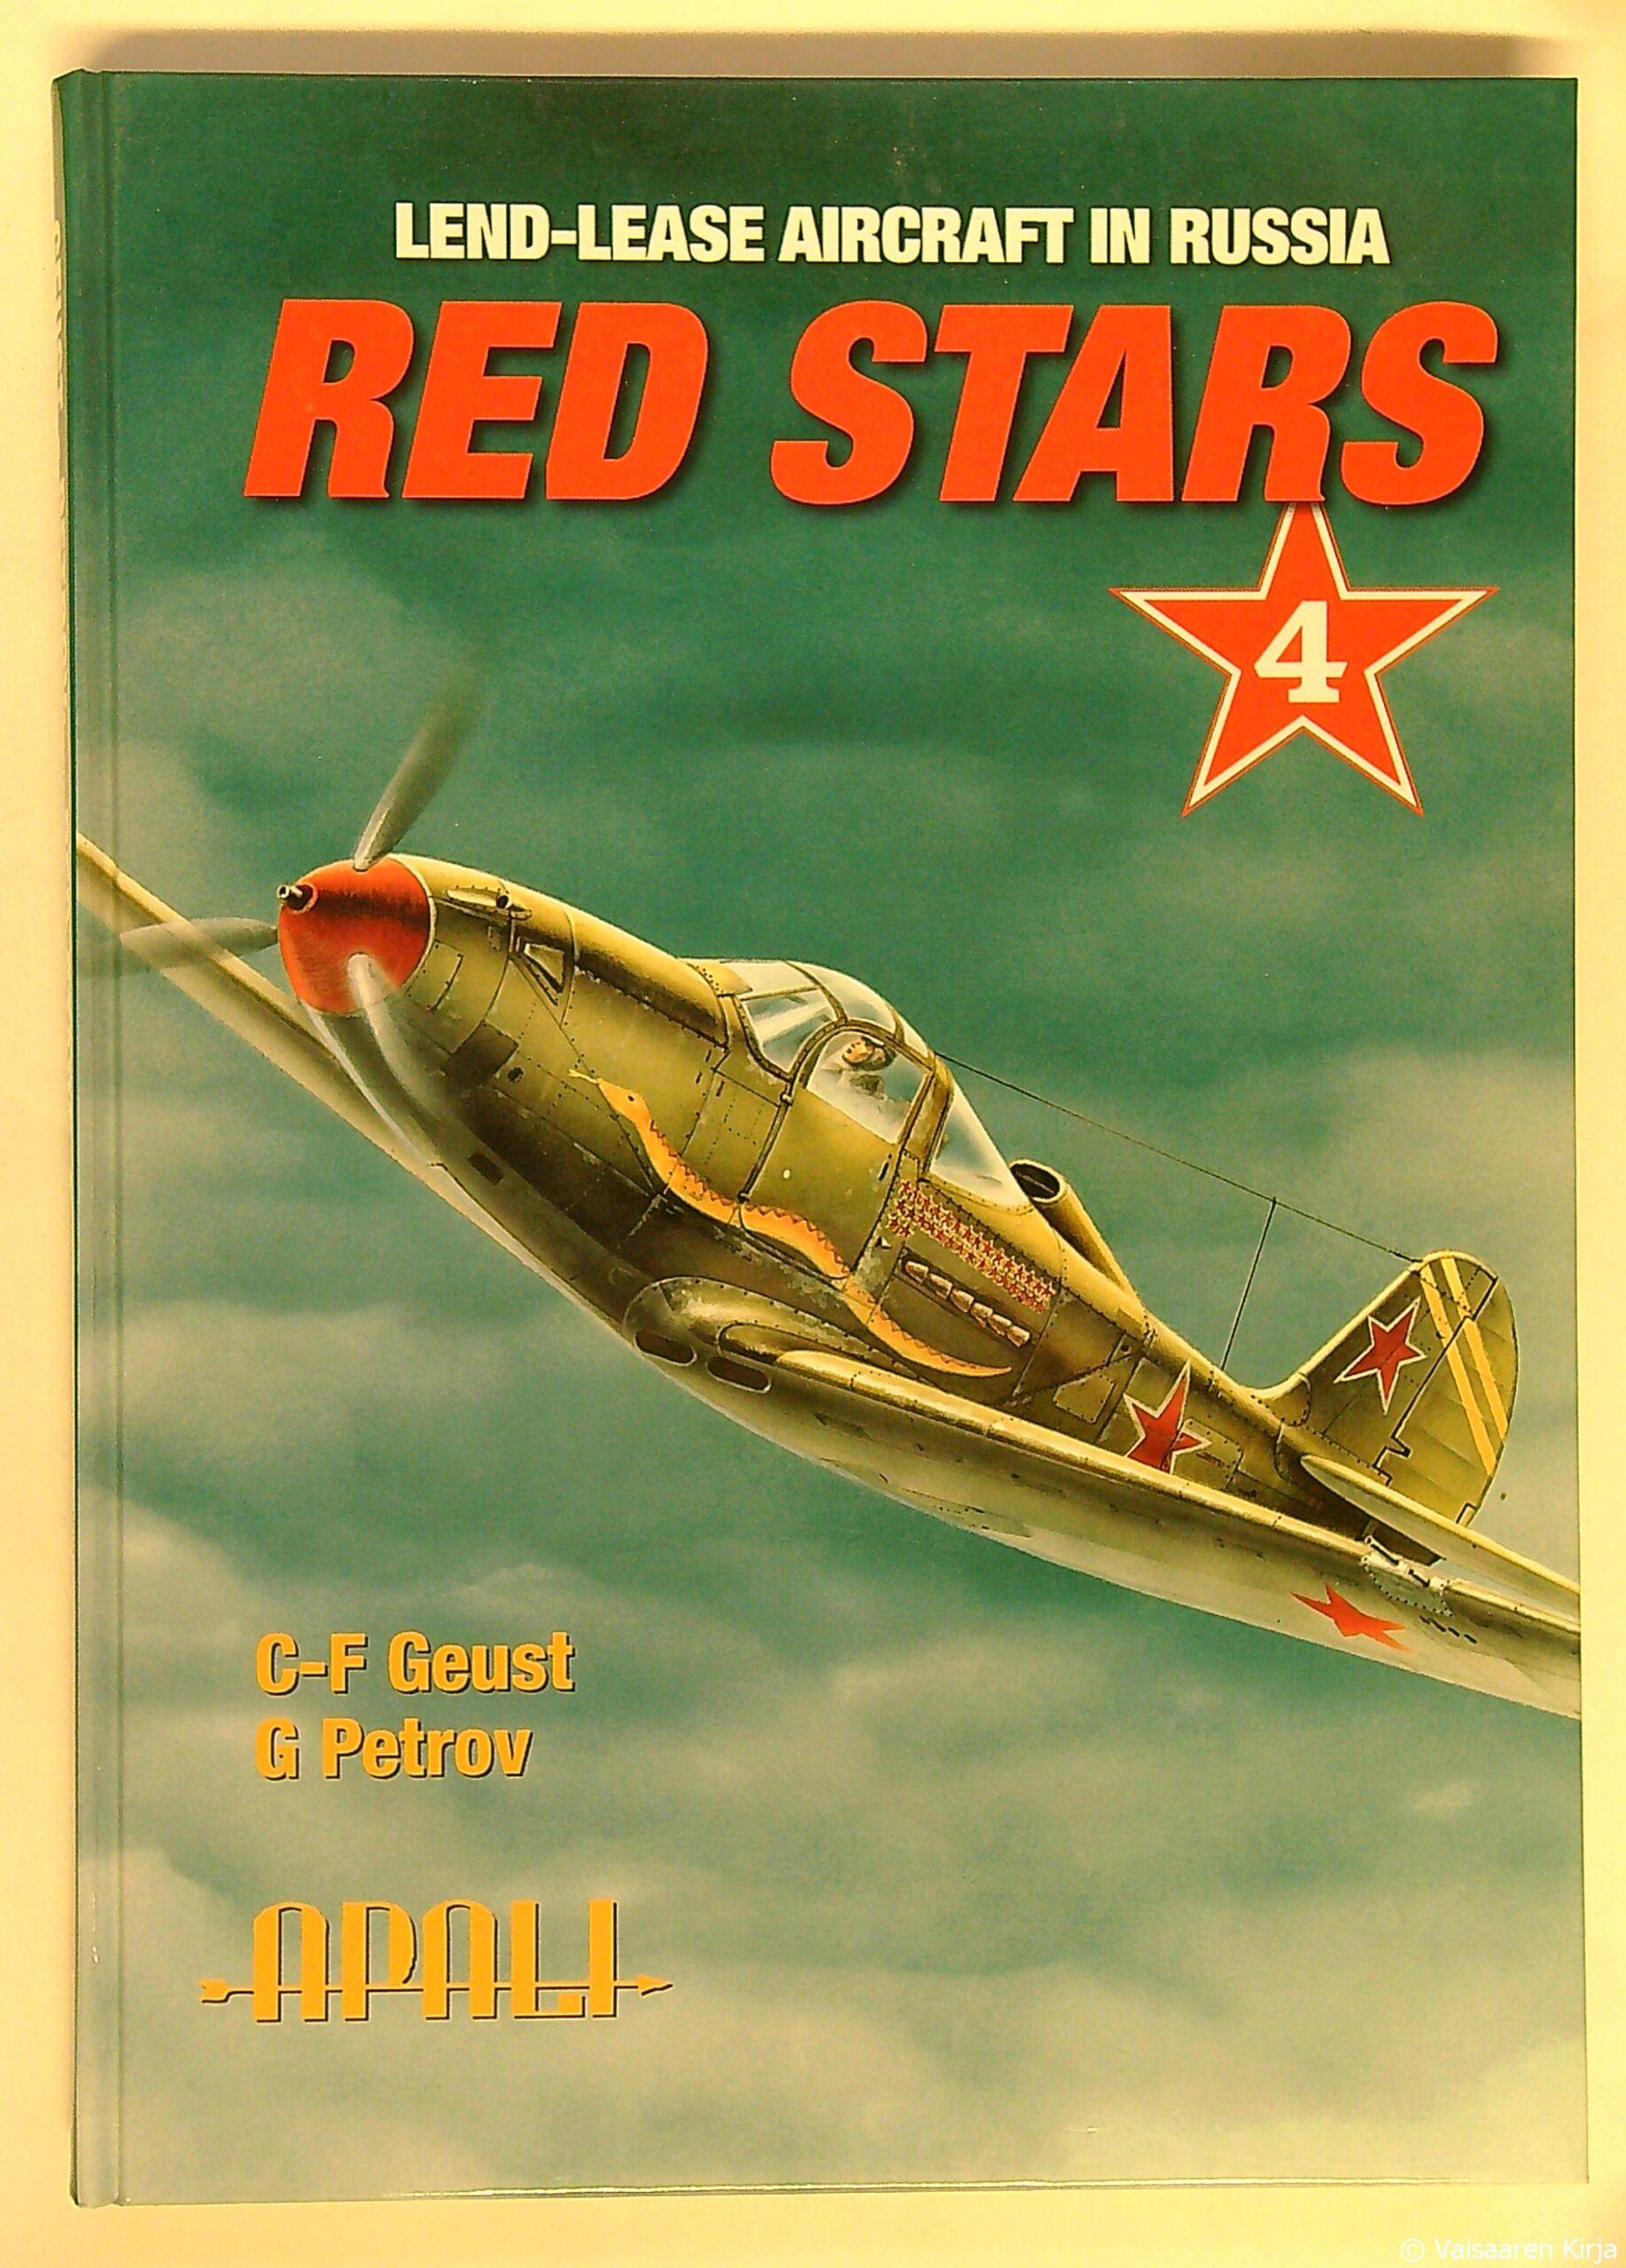 Red stars 4, Lend-lease aircraft in Russia